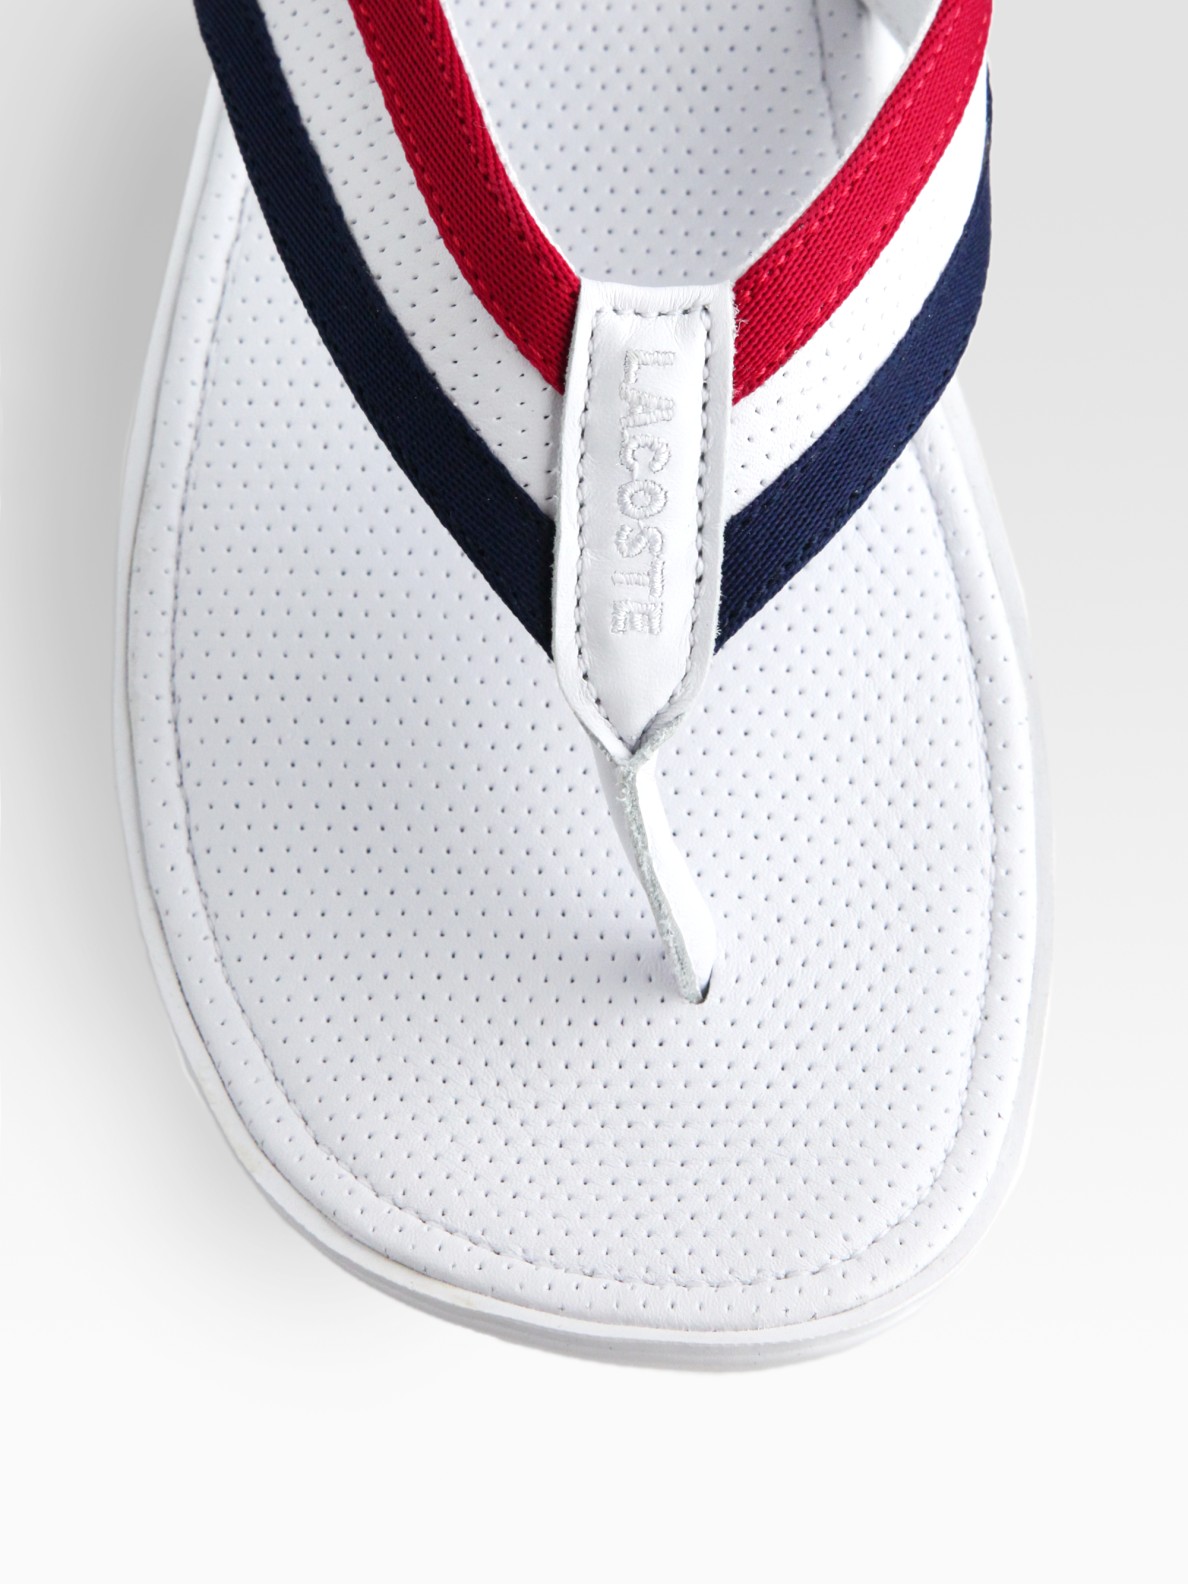 Lacoste Carros Striped Flip-flop in White for Men | Lyst